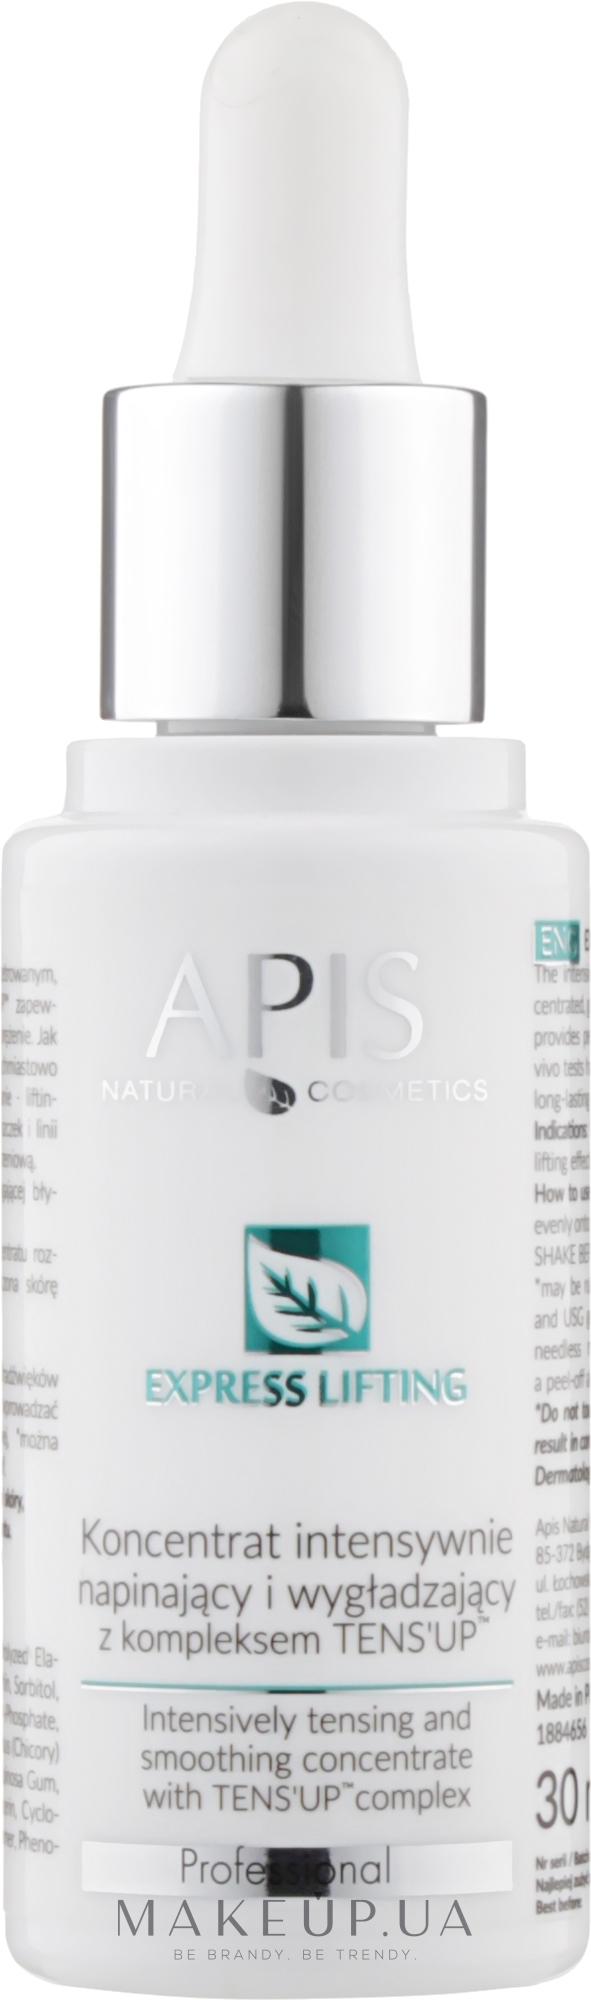 Концентрат для обличчя - APIS Professional Express Lifting Intensive Firming And Smoothing Concentrate — фото 30ml